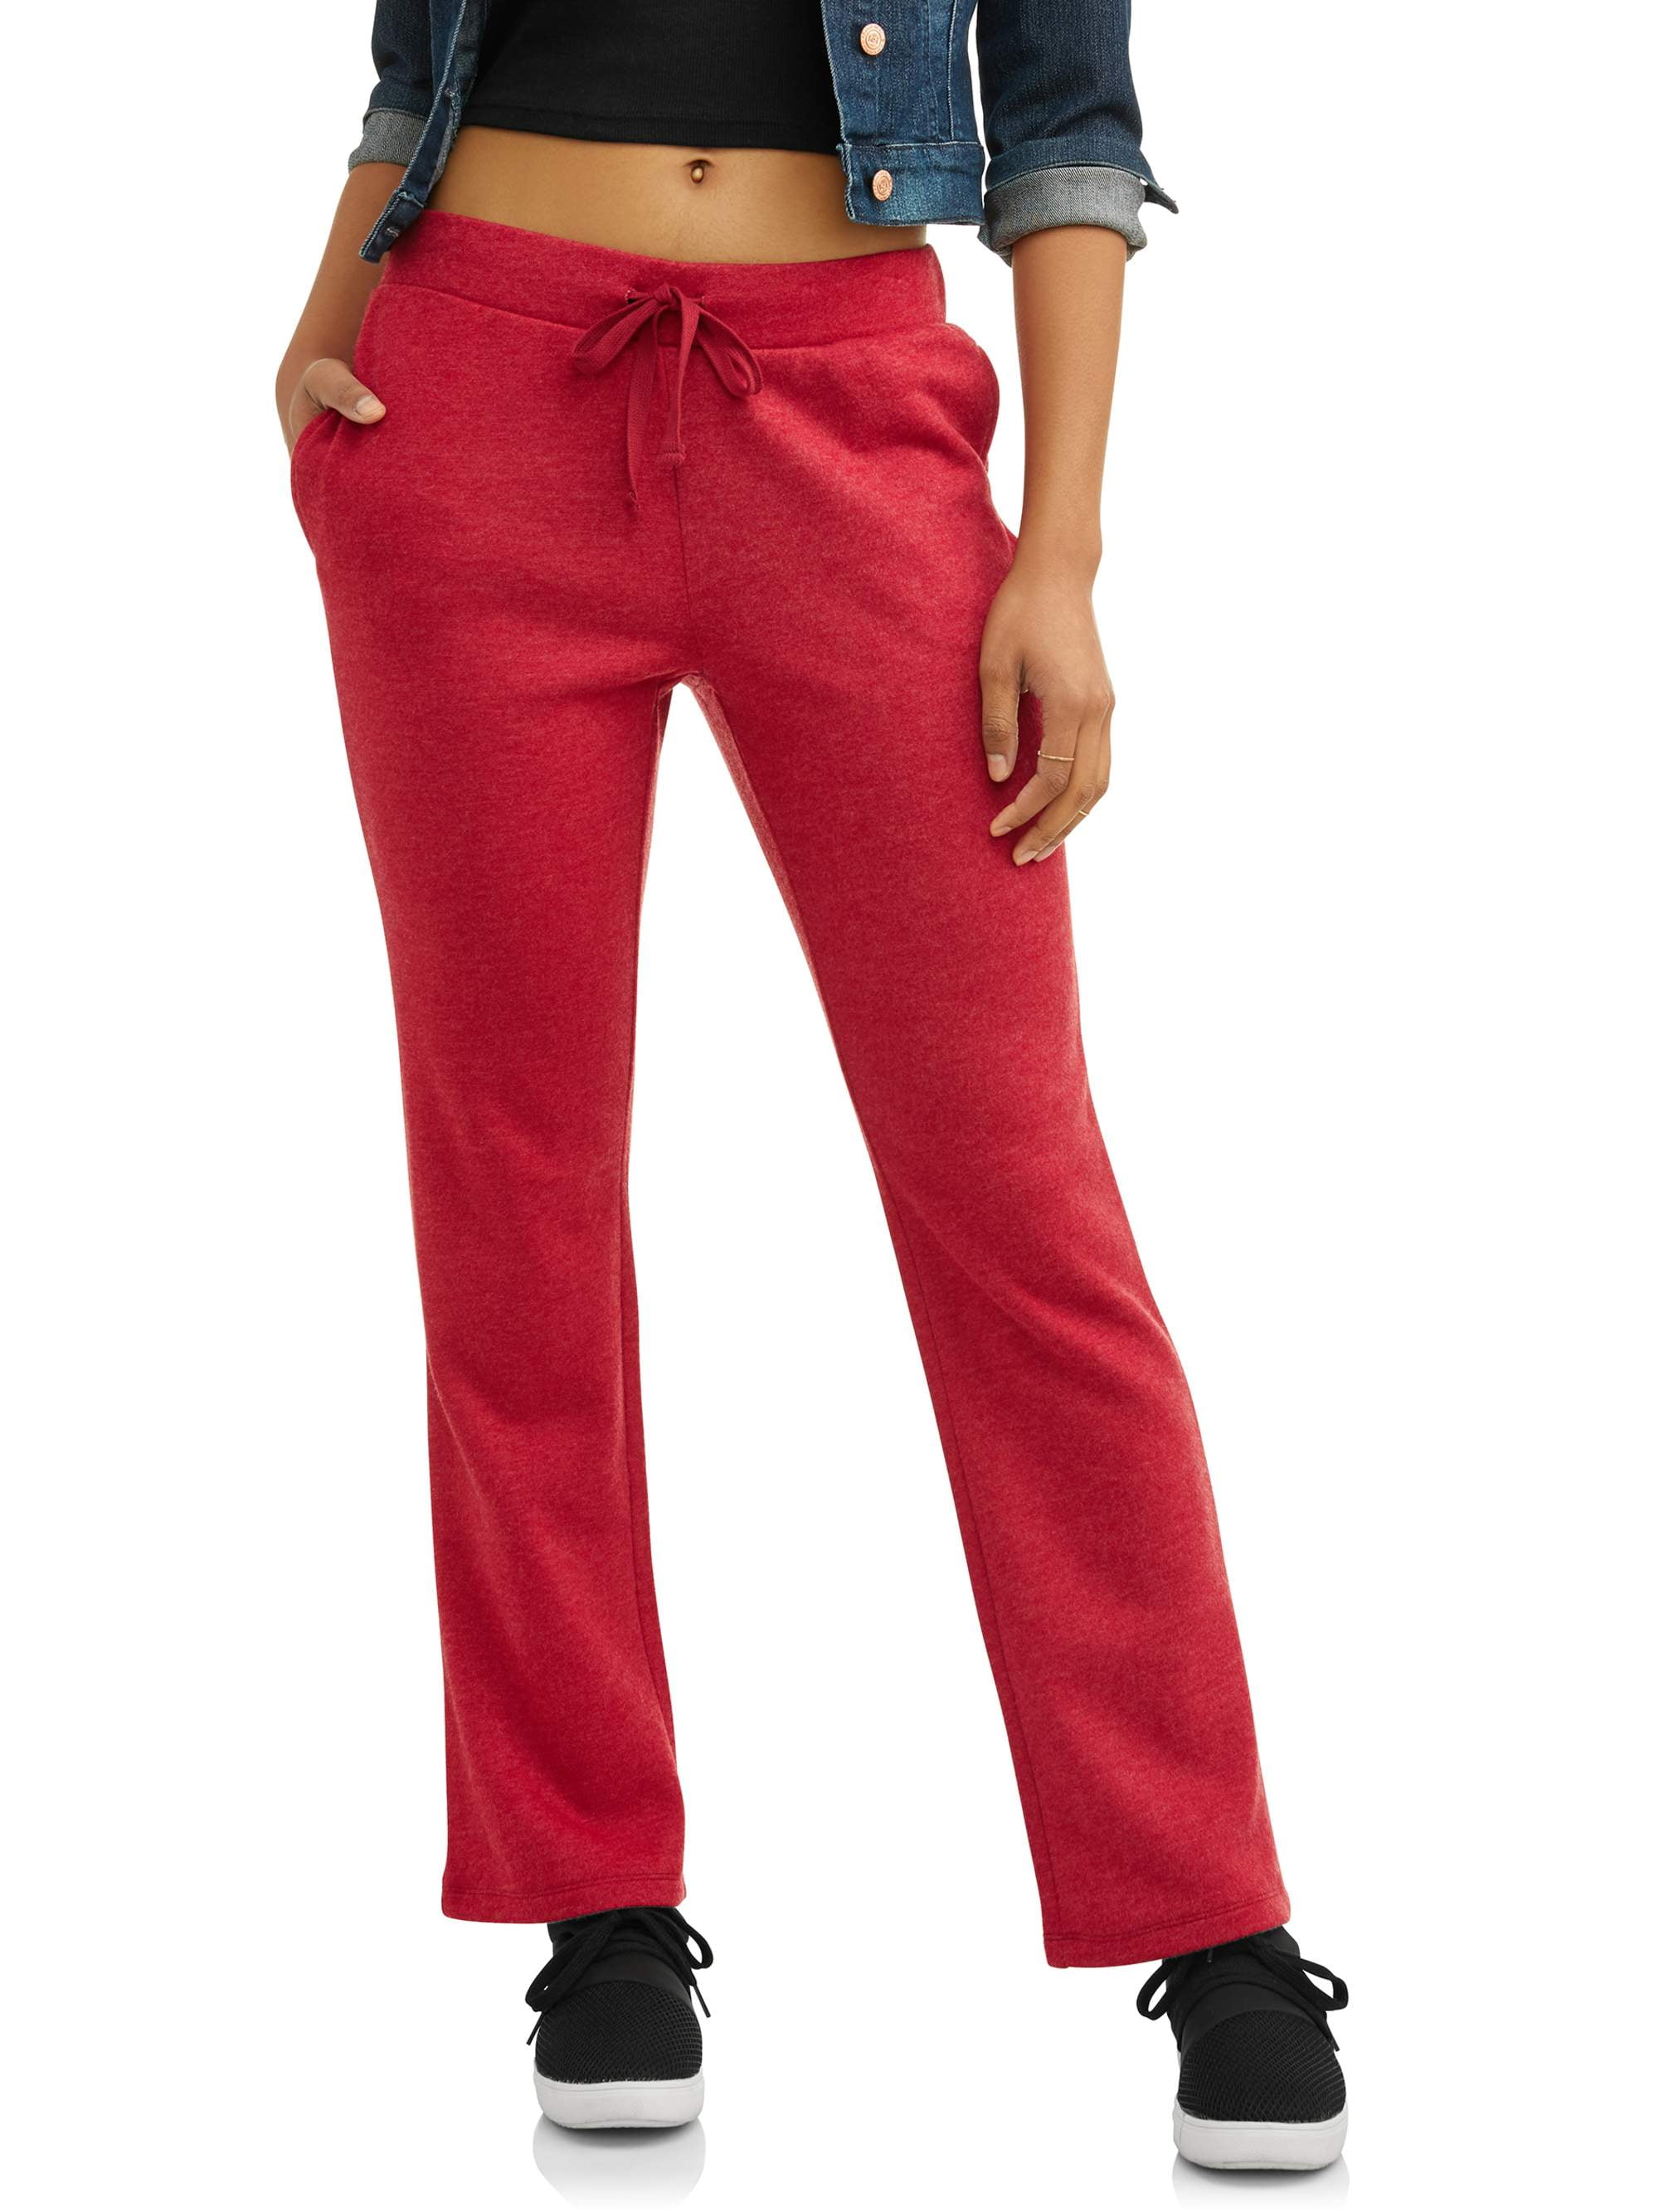 Athletic Works Women's Athleisure Fleece Pants with Front Pockets ...